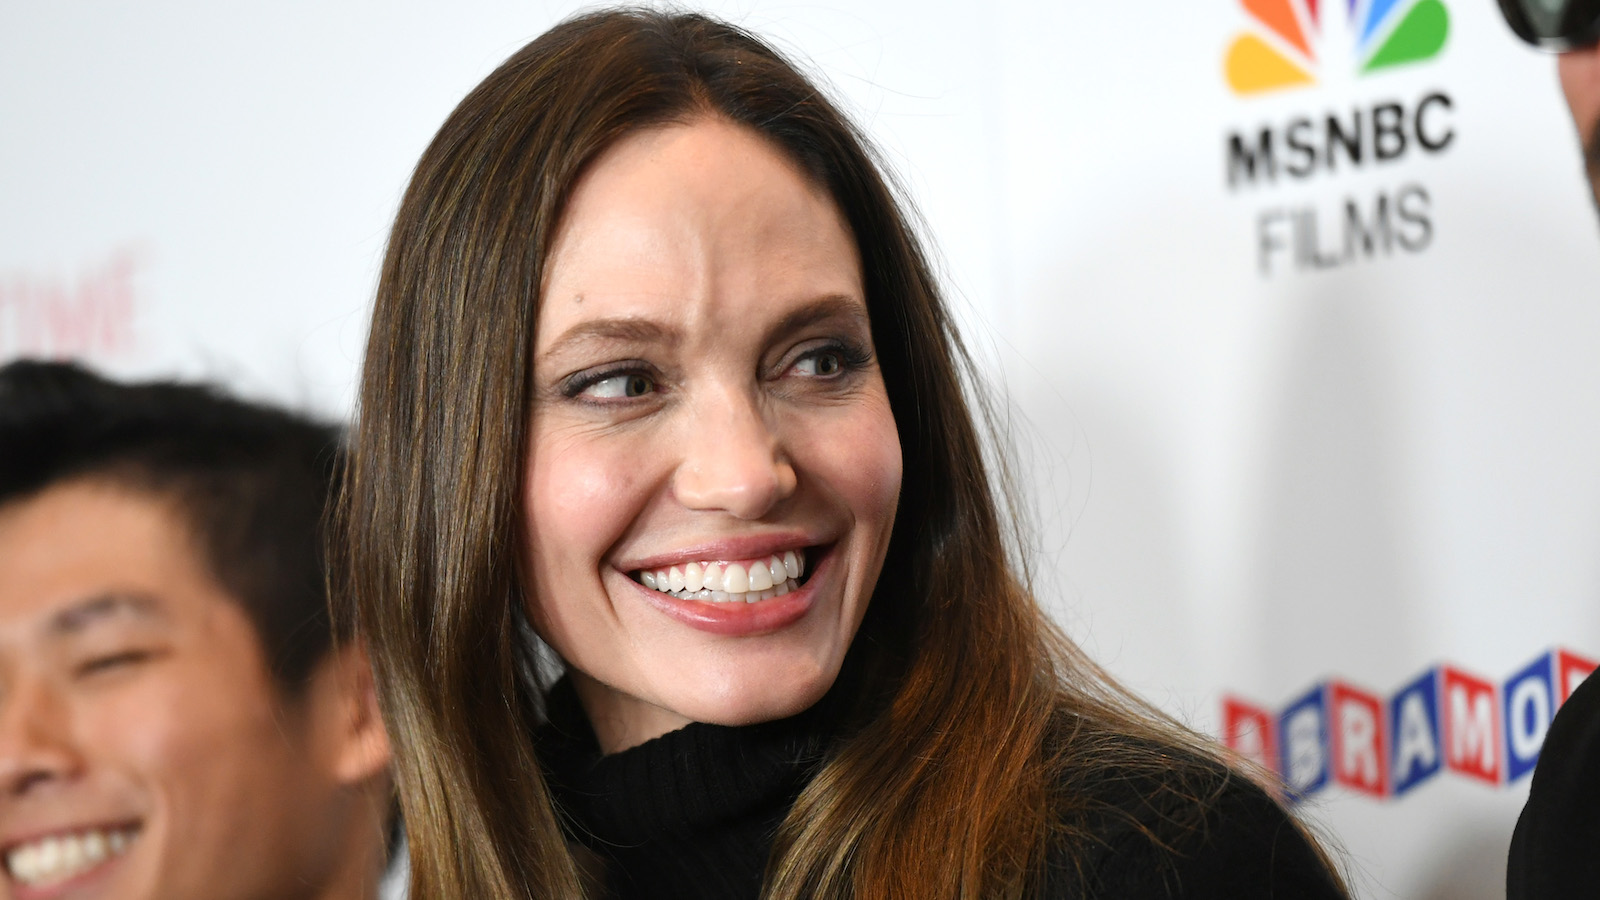 Angelina Jolie Sets Fremantle Deal, 'Without Blood' is First Project